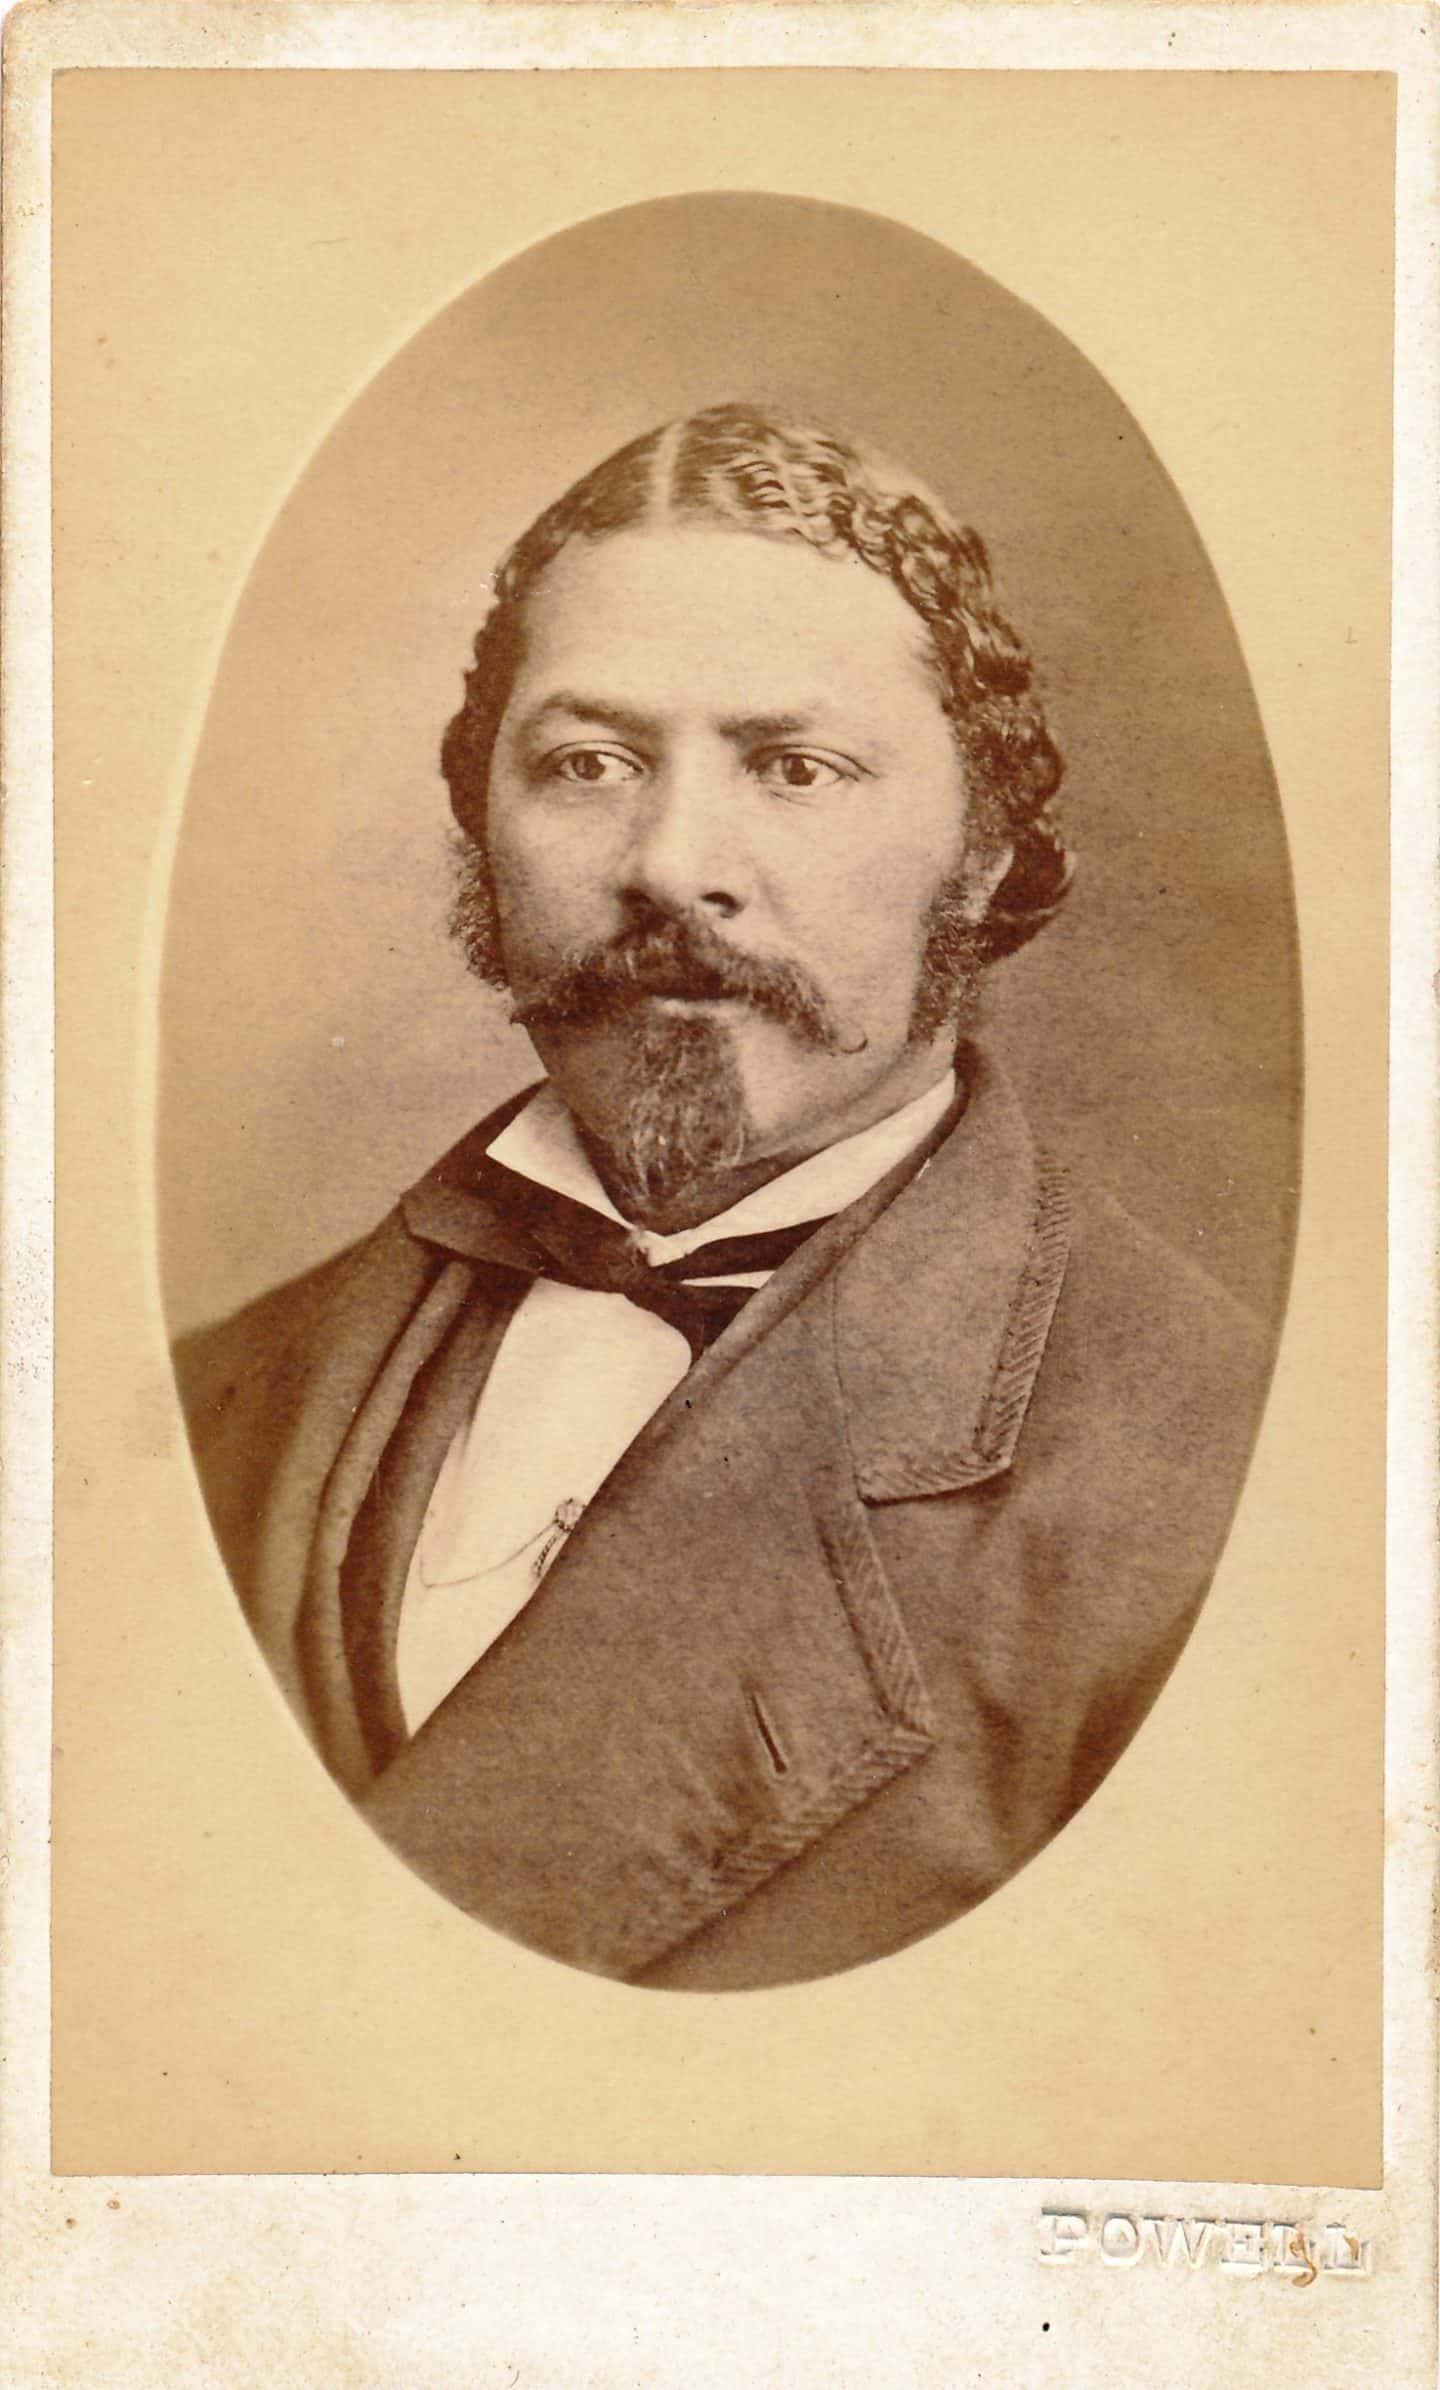 Portrait photograph of Jim Johnson. The image is sepia toned and is round. Johnson wears a dark day coat with a bow tie.